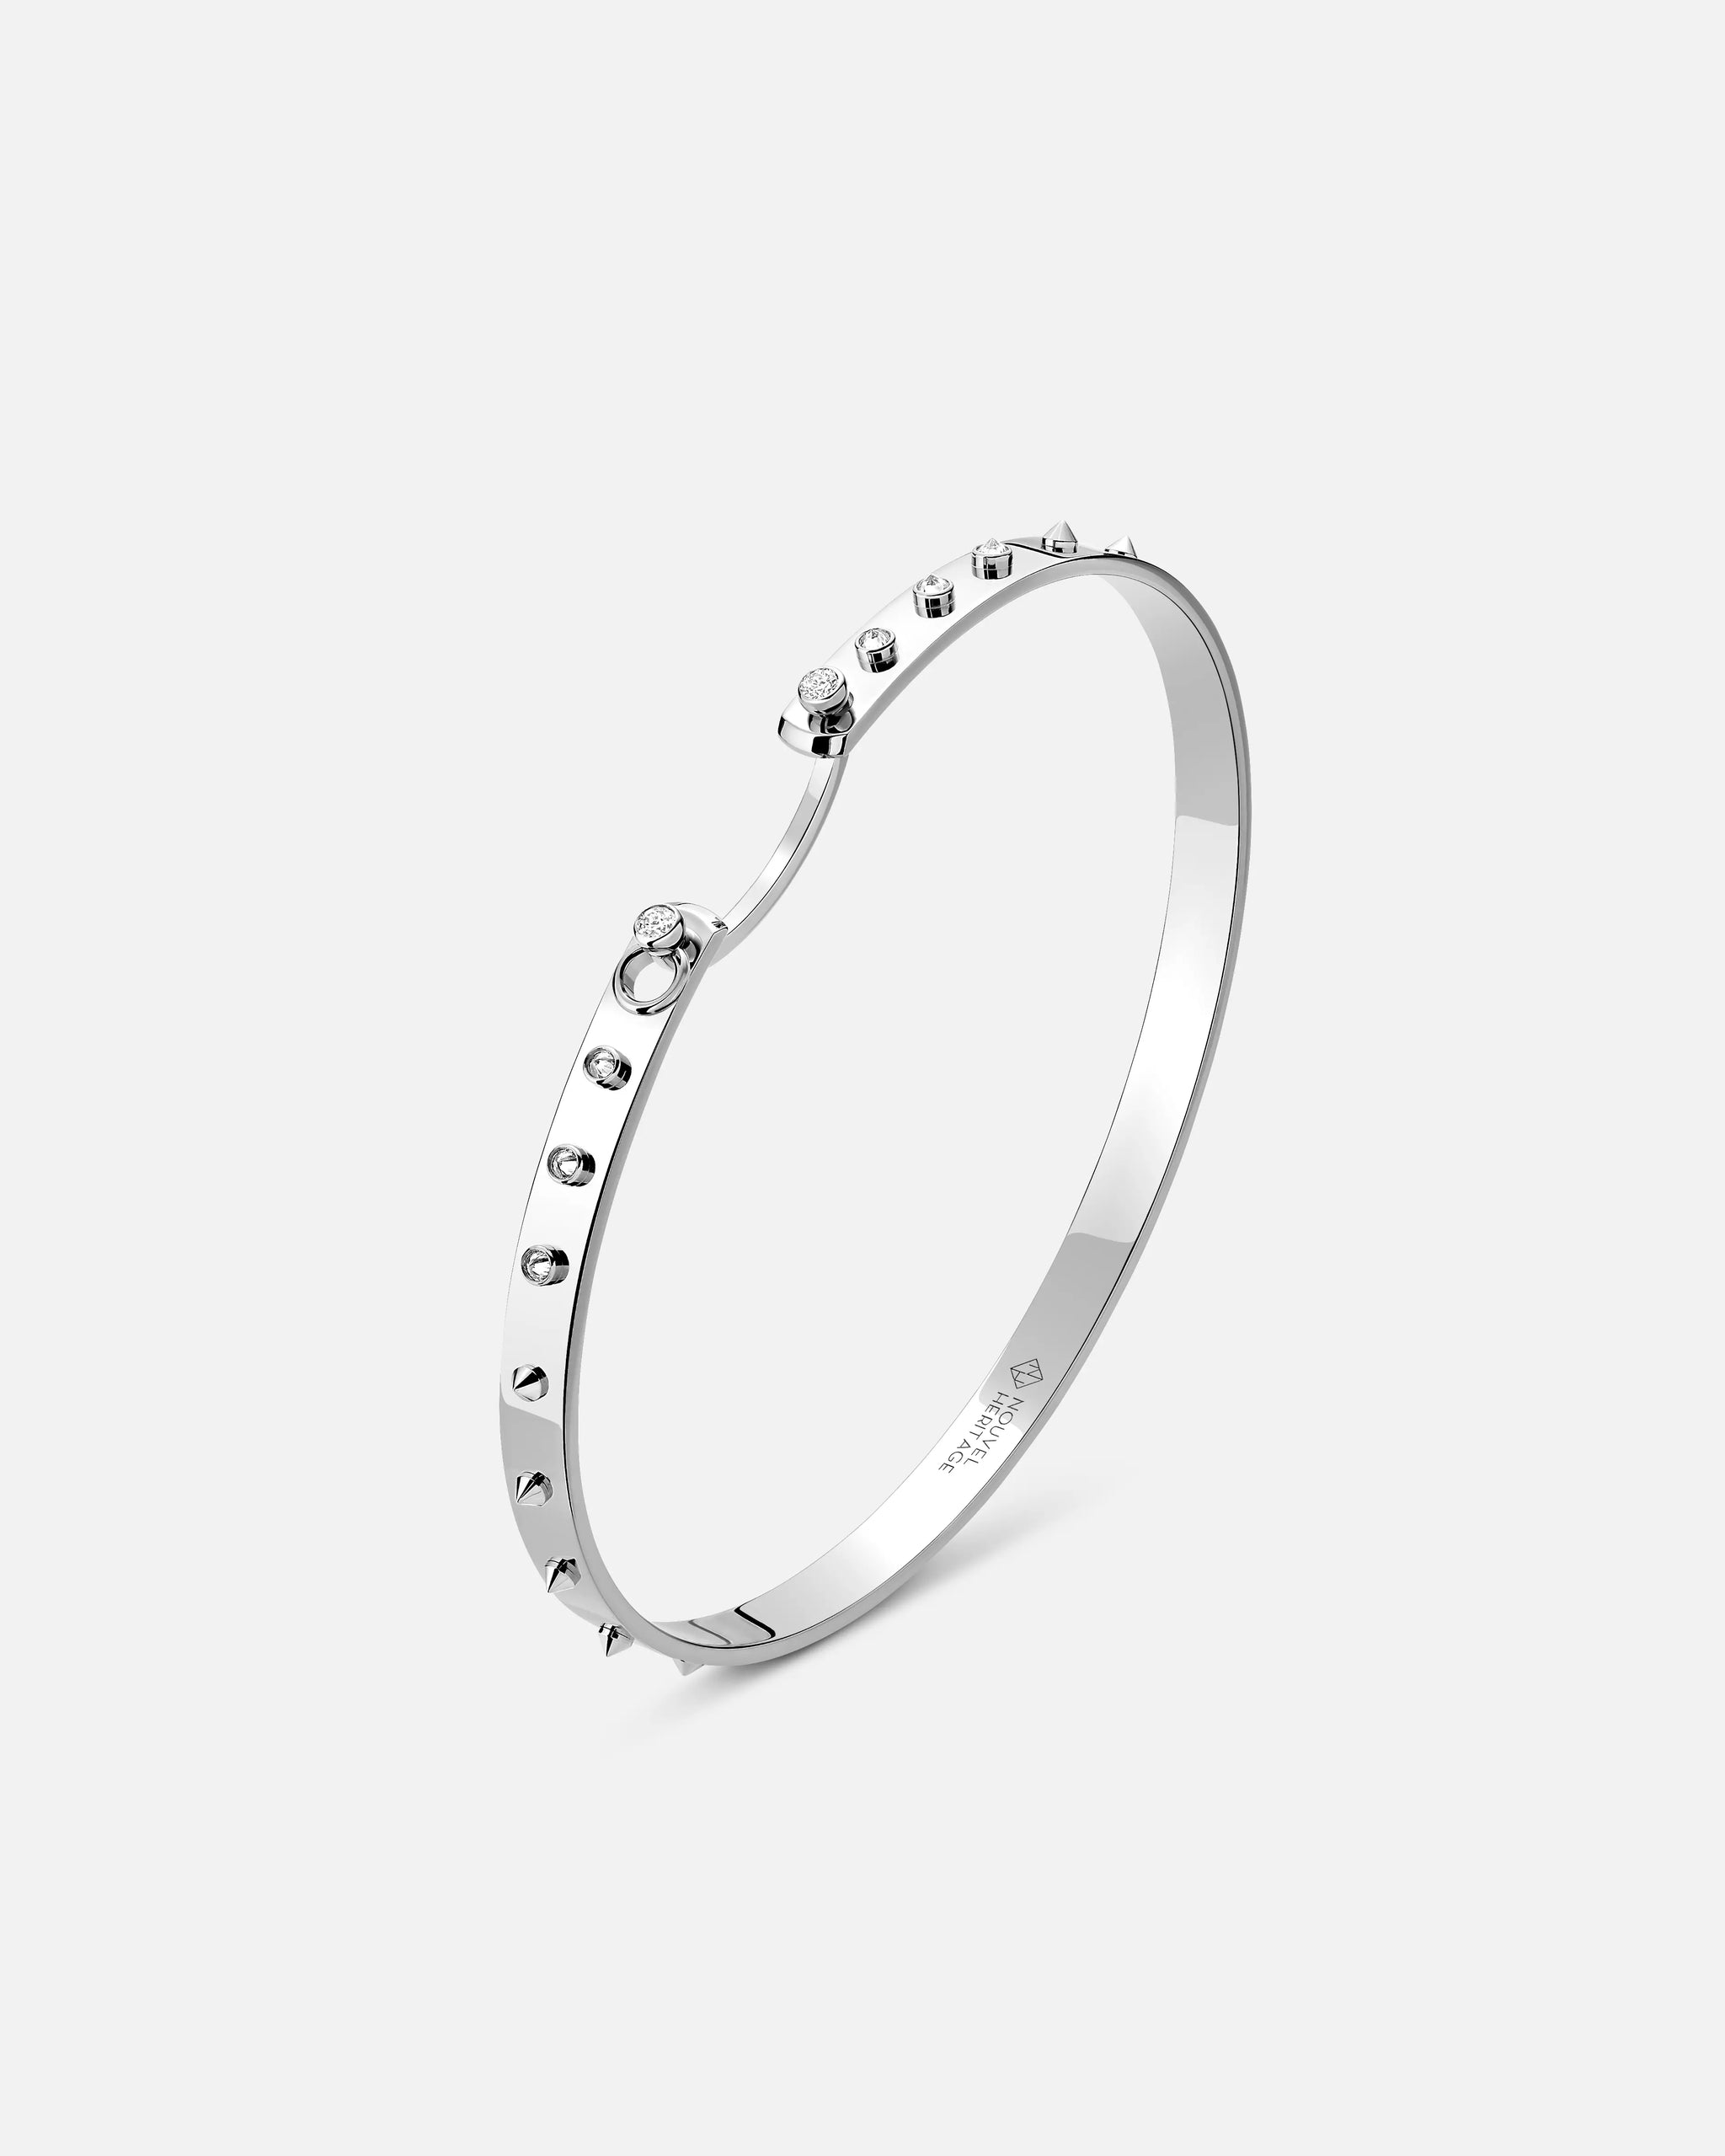 Brunch in NY Mood Bangle in White Gold - 1 - Nouvel Heritage